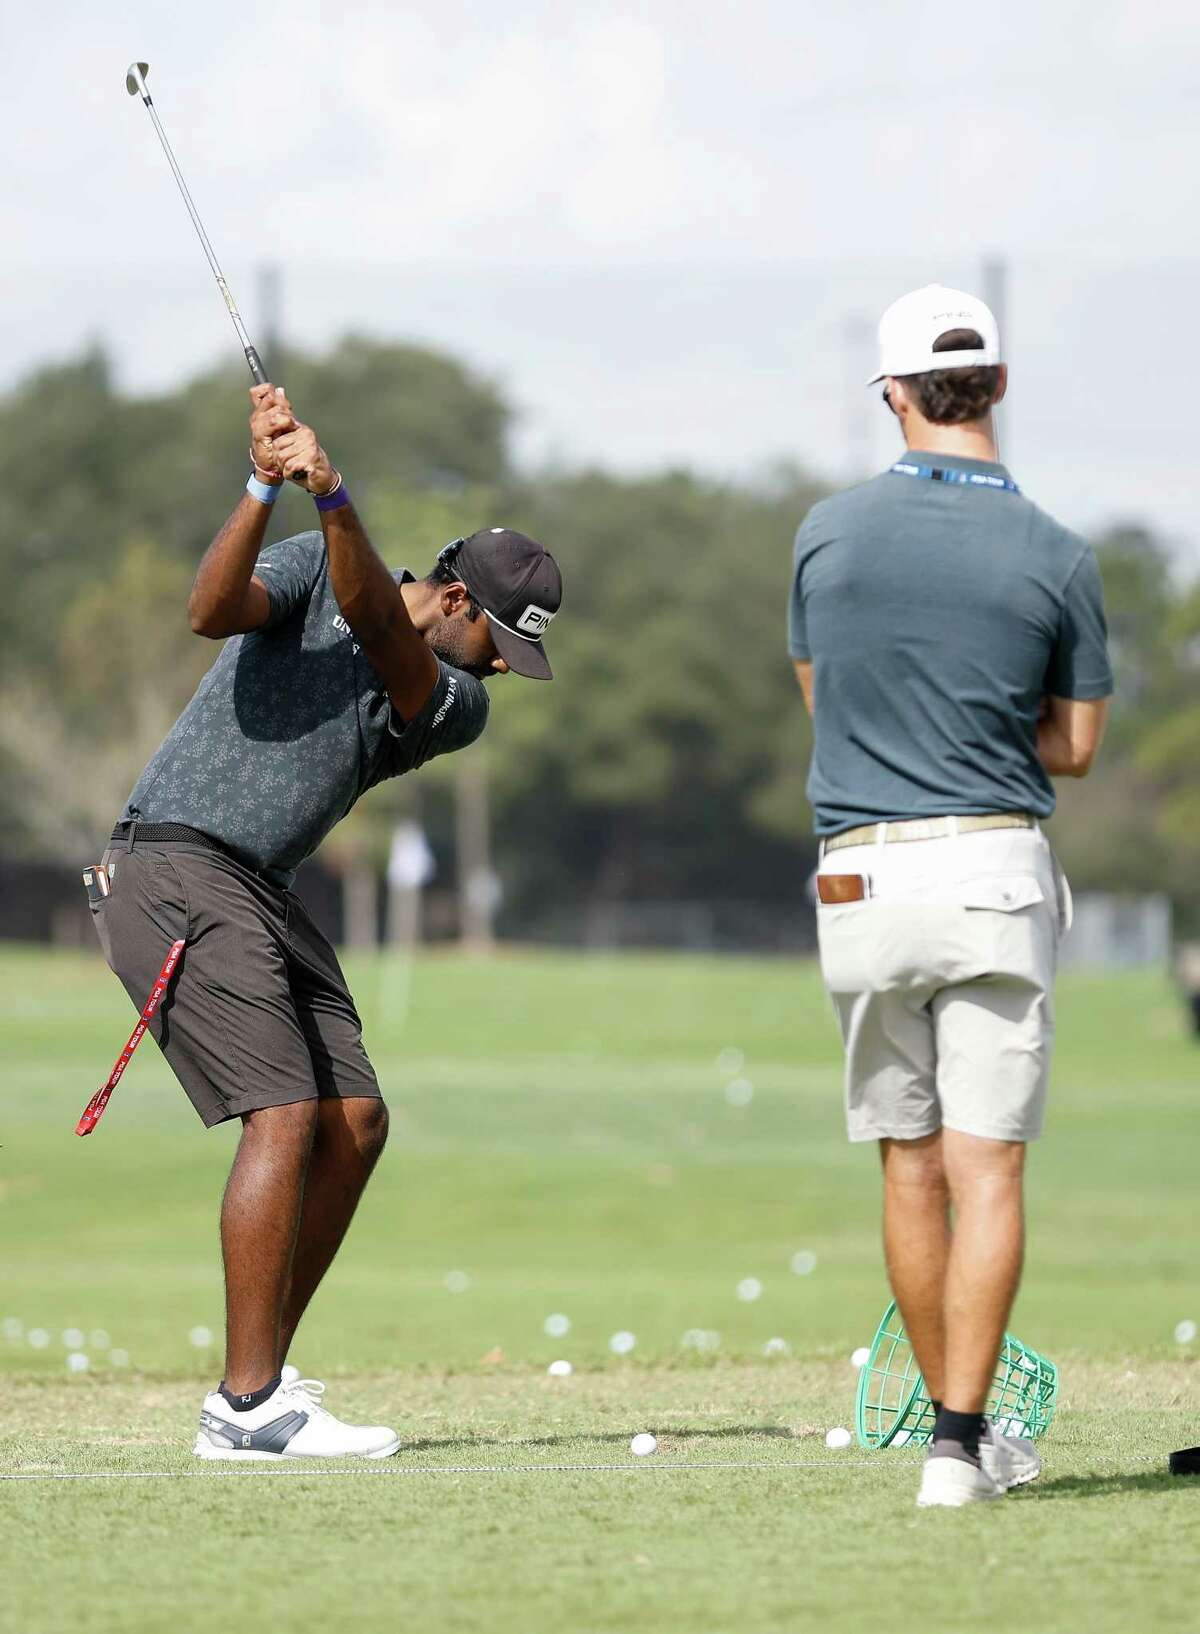 Sahith Theegala is seen on the driving range after his round at the Houston Open Pro-Am at Memorial Park Golf Course in Houston, TX on Wednesday, November 9, 2022.